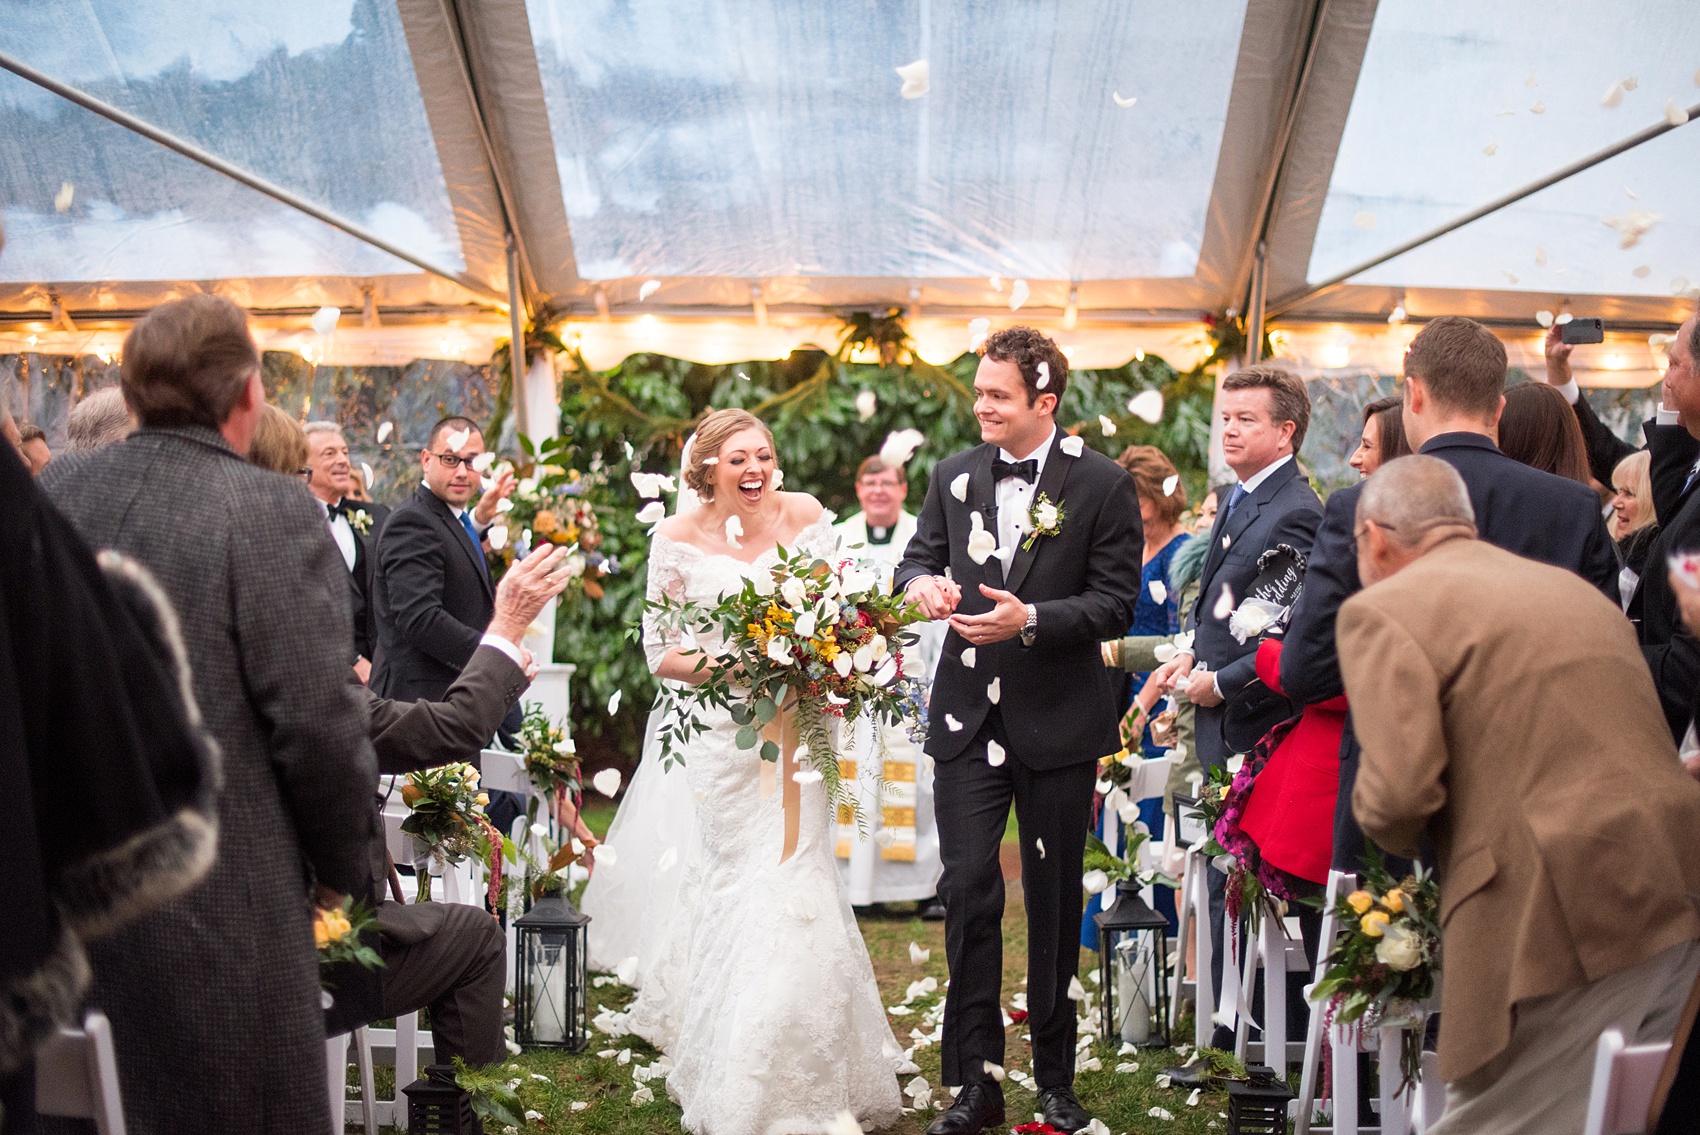 Beautiful wedding photos at The Carolina Inn at Chapel Hill, North Carolina by Mikkel Paige Photography. Picture of the outdoor ceremony under a clear tent with a white rose petal toss exit. Click through to see the rest of this gorgeous winter wedding! #thecarolinainn #snowywedding